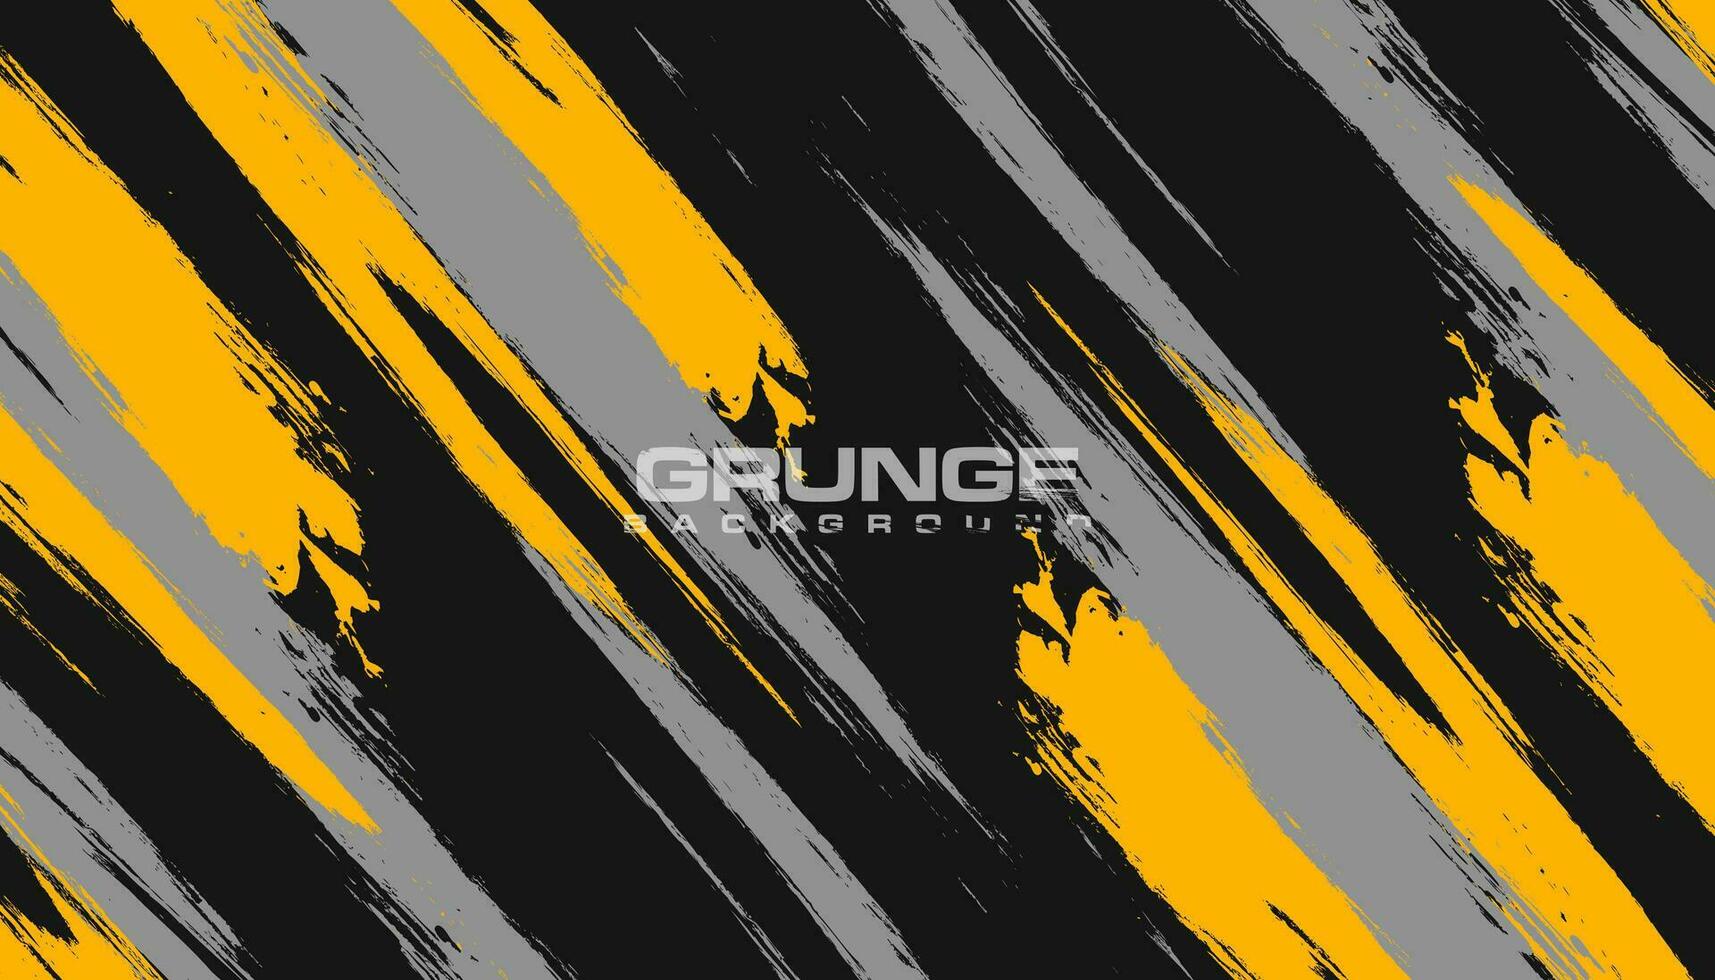 Black and yellow textured vector grungy background